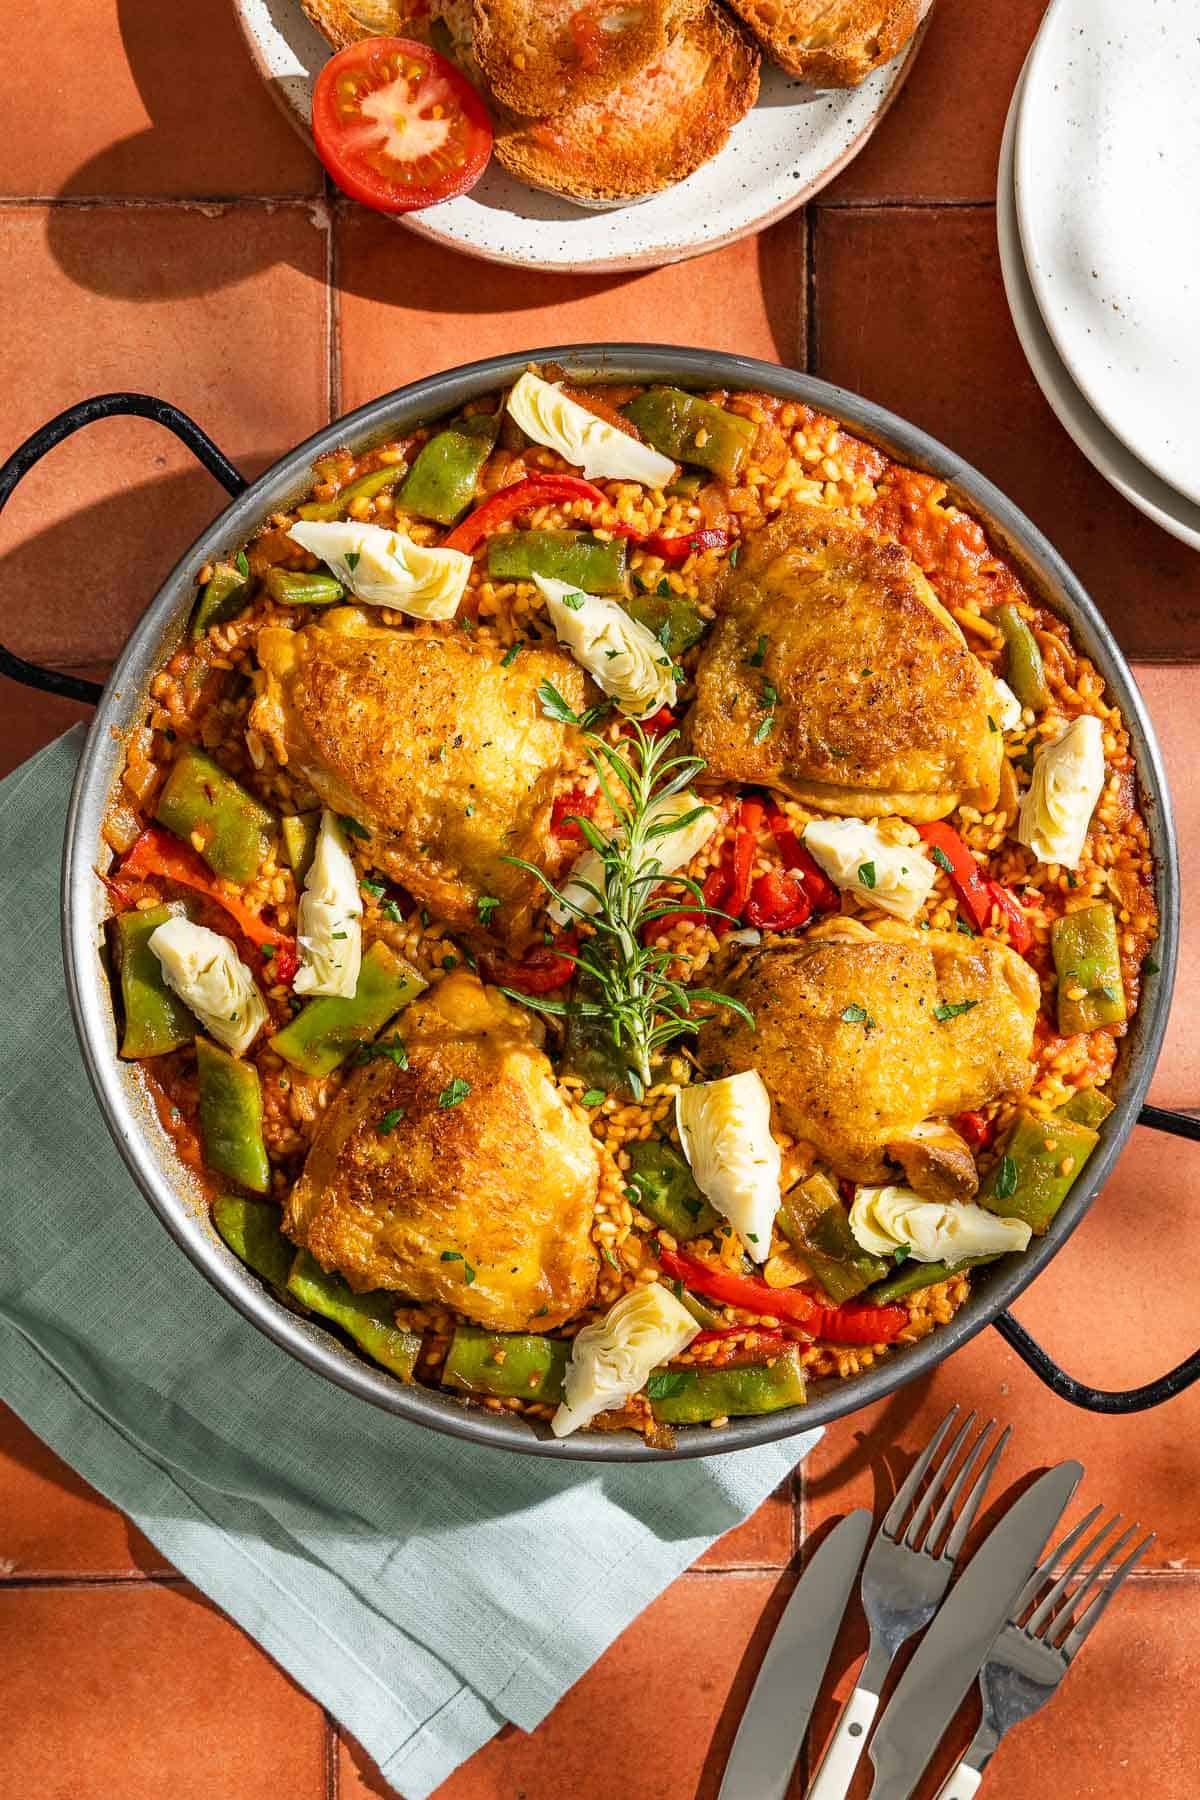 An overhead photo of chicken paella in a large paella pan. Next to this is a cloth napkin, knives and forks, a stack of 2 plates, and a plate with tomatoes and toasted bread.